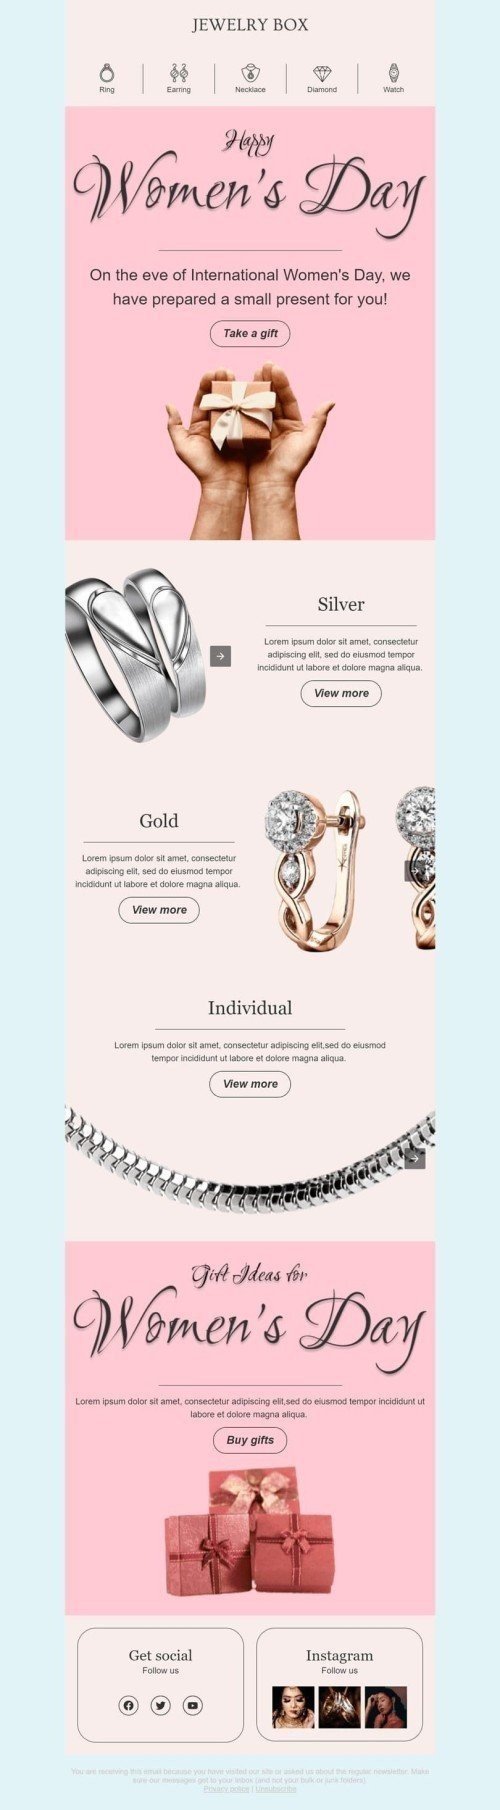 Women's Day Email Template «Jewelry box» for Jewelry industry desktop view